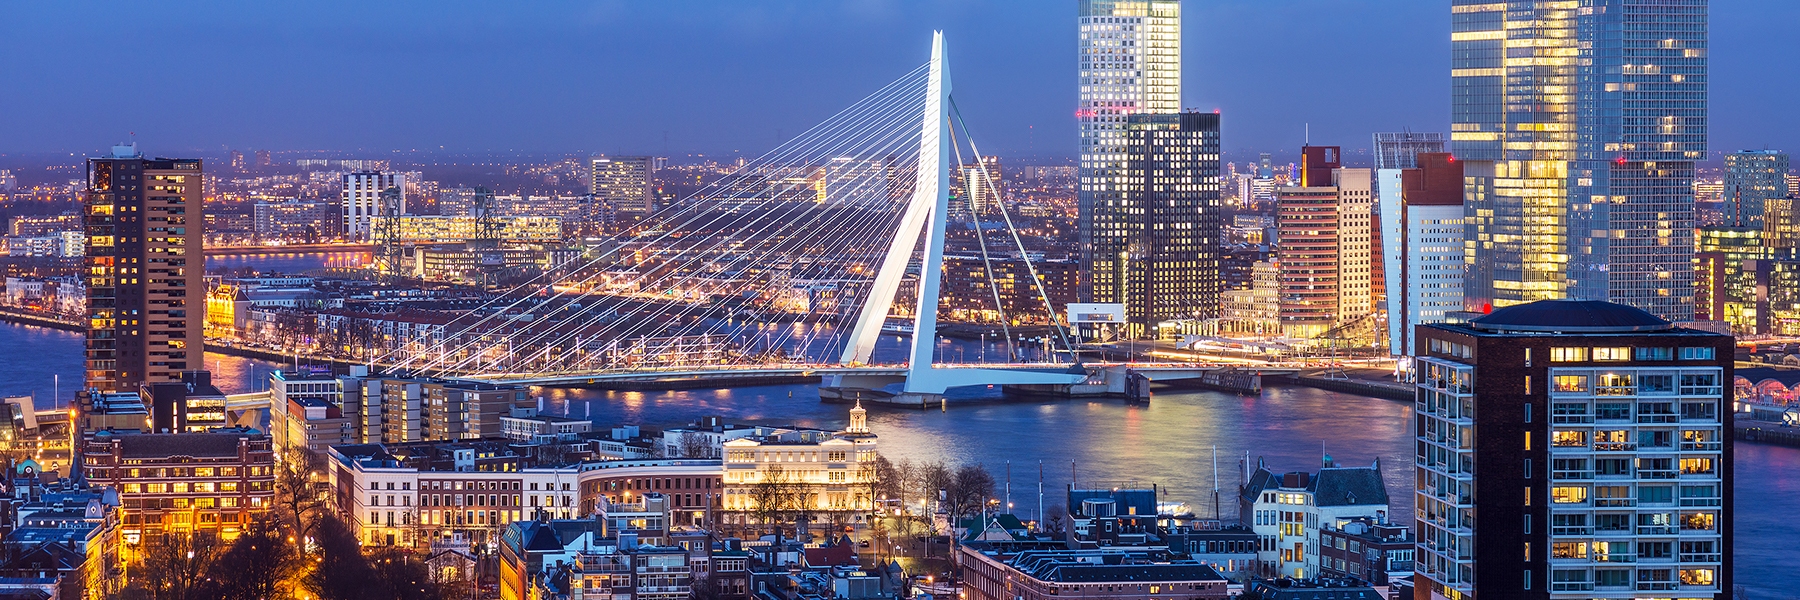 Rotterdam photo gallery - a snapshot of the city